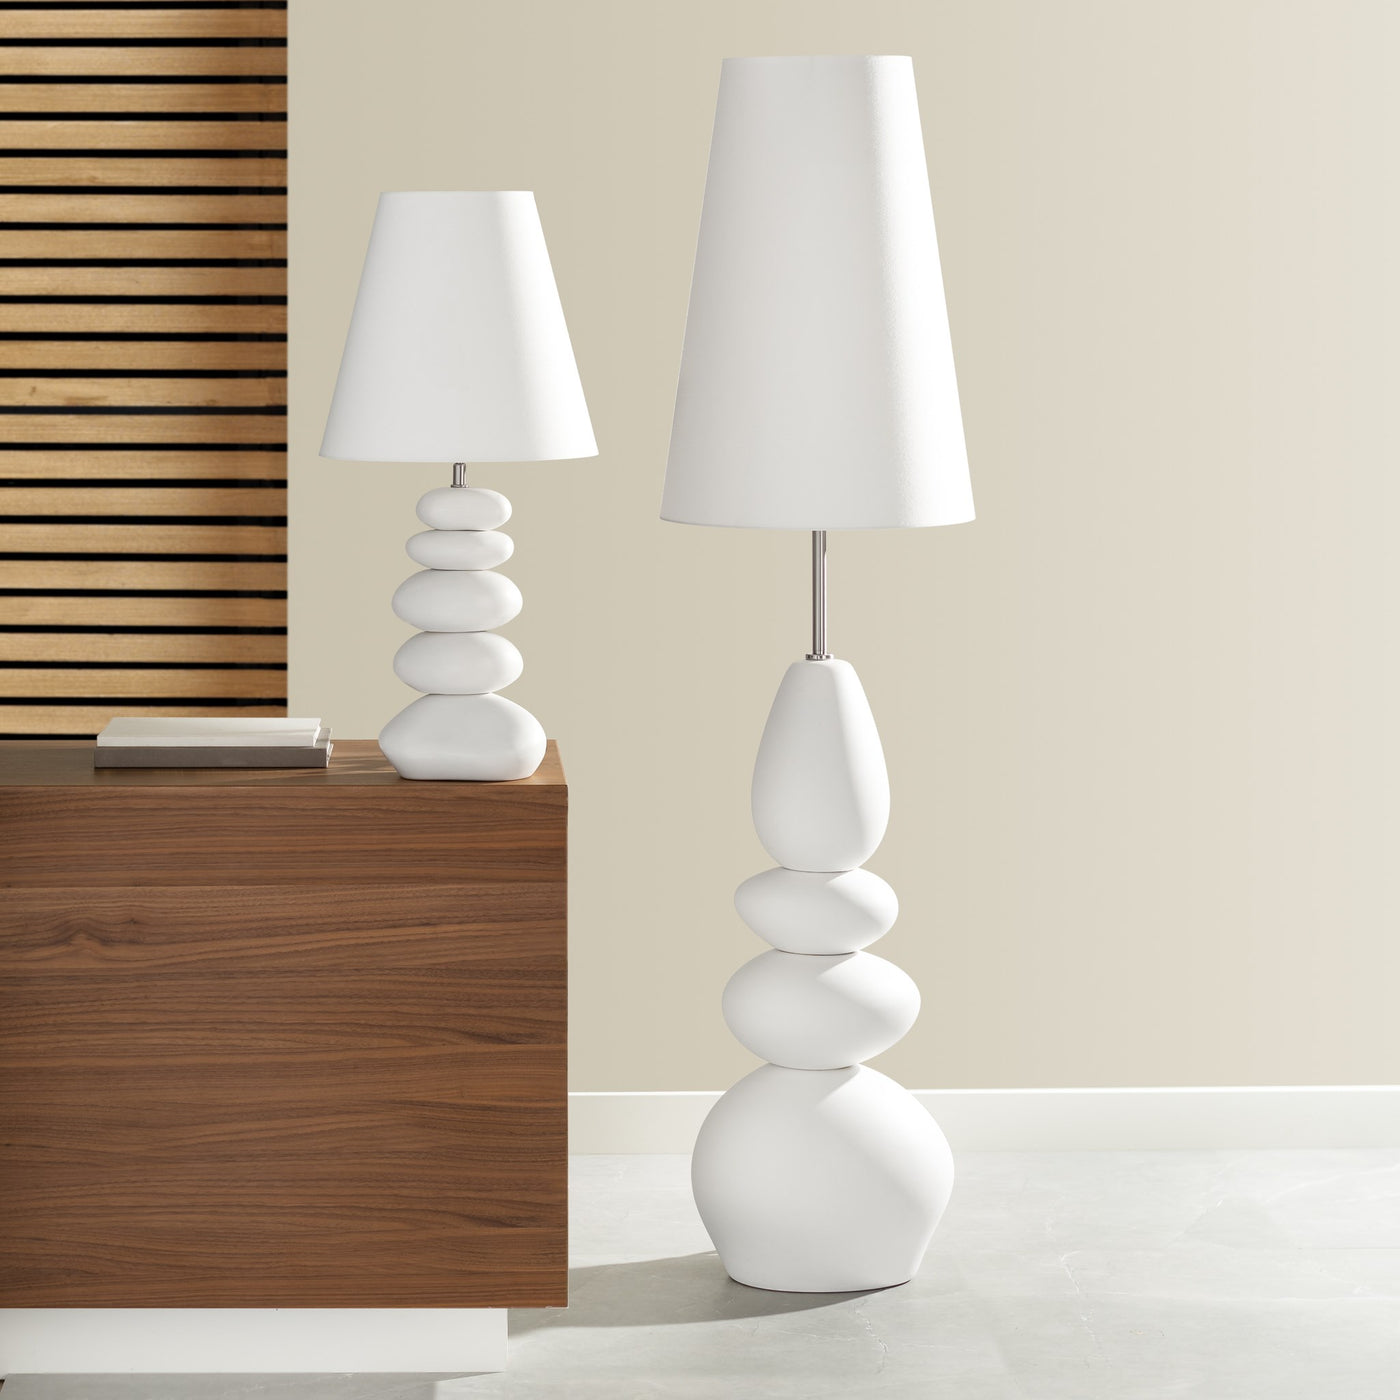 Oslo Ceramic White Stacked Stone 27h" Table Lamp